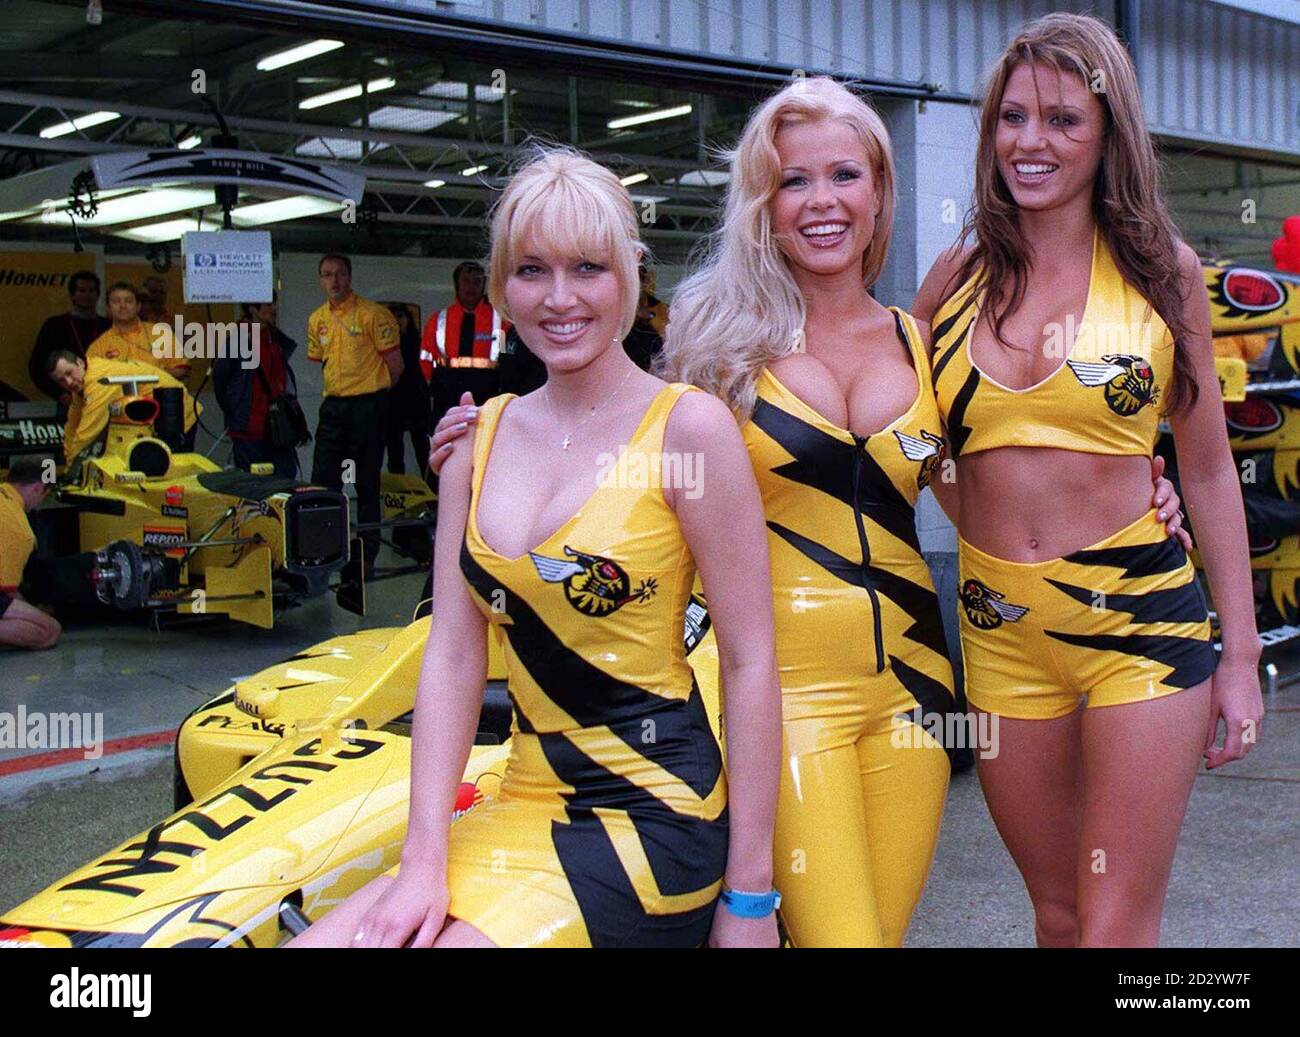 Models Emma Noble, Melinda Messenger and Jordan pose with today (Sunday) ahead of the start of the British Grand Prix. Photo by Owen Humphreys/PA Stock Photo